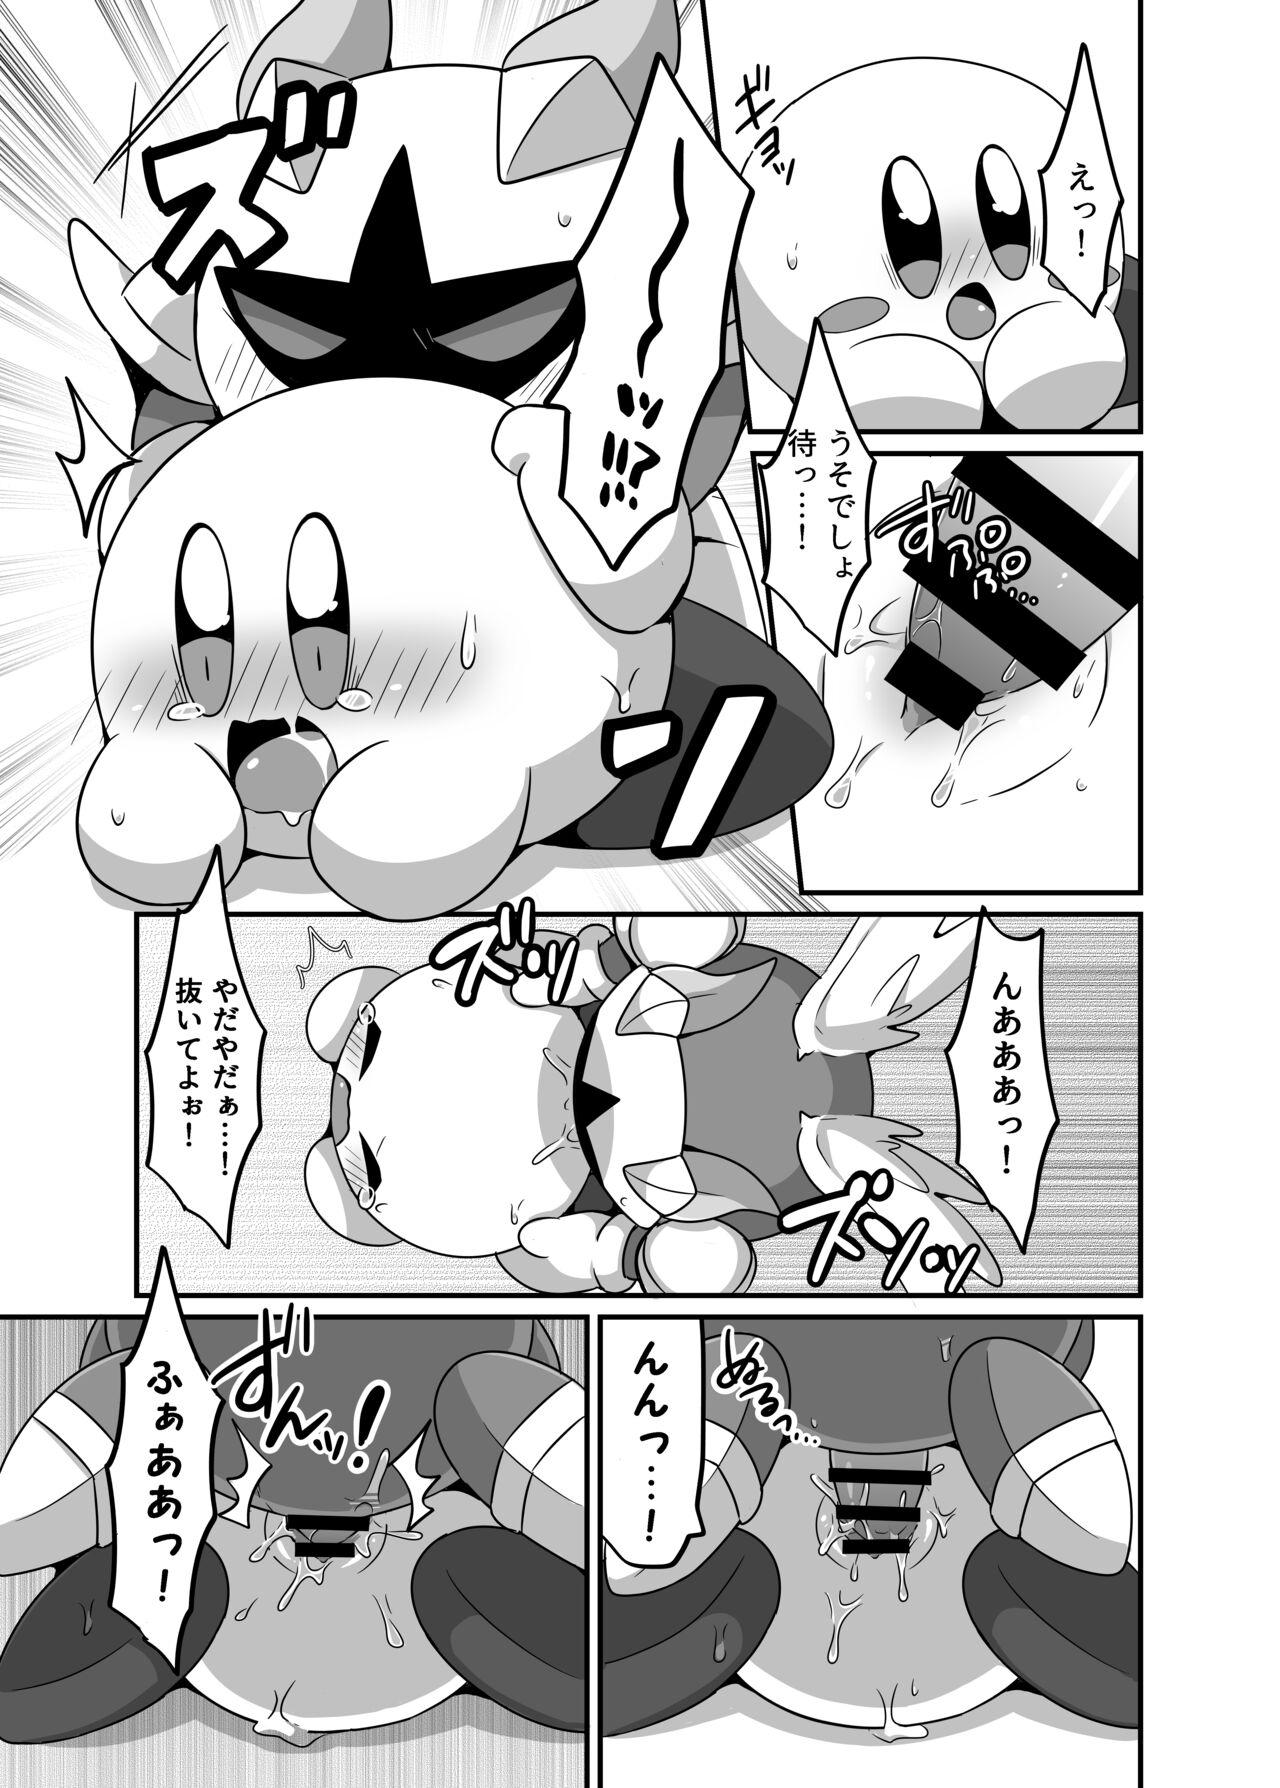 Magrinha I Want to Do XXX Even For Spheres! - Kirby Bra - Page 5